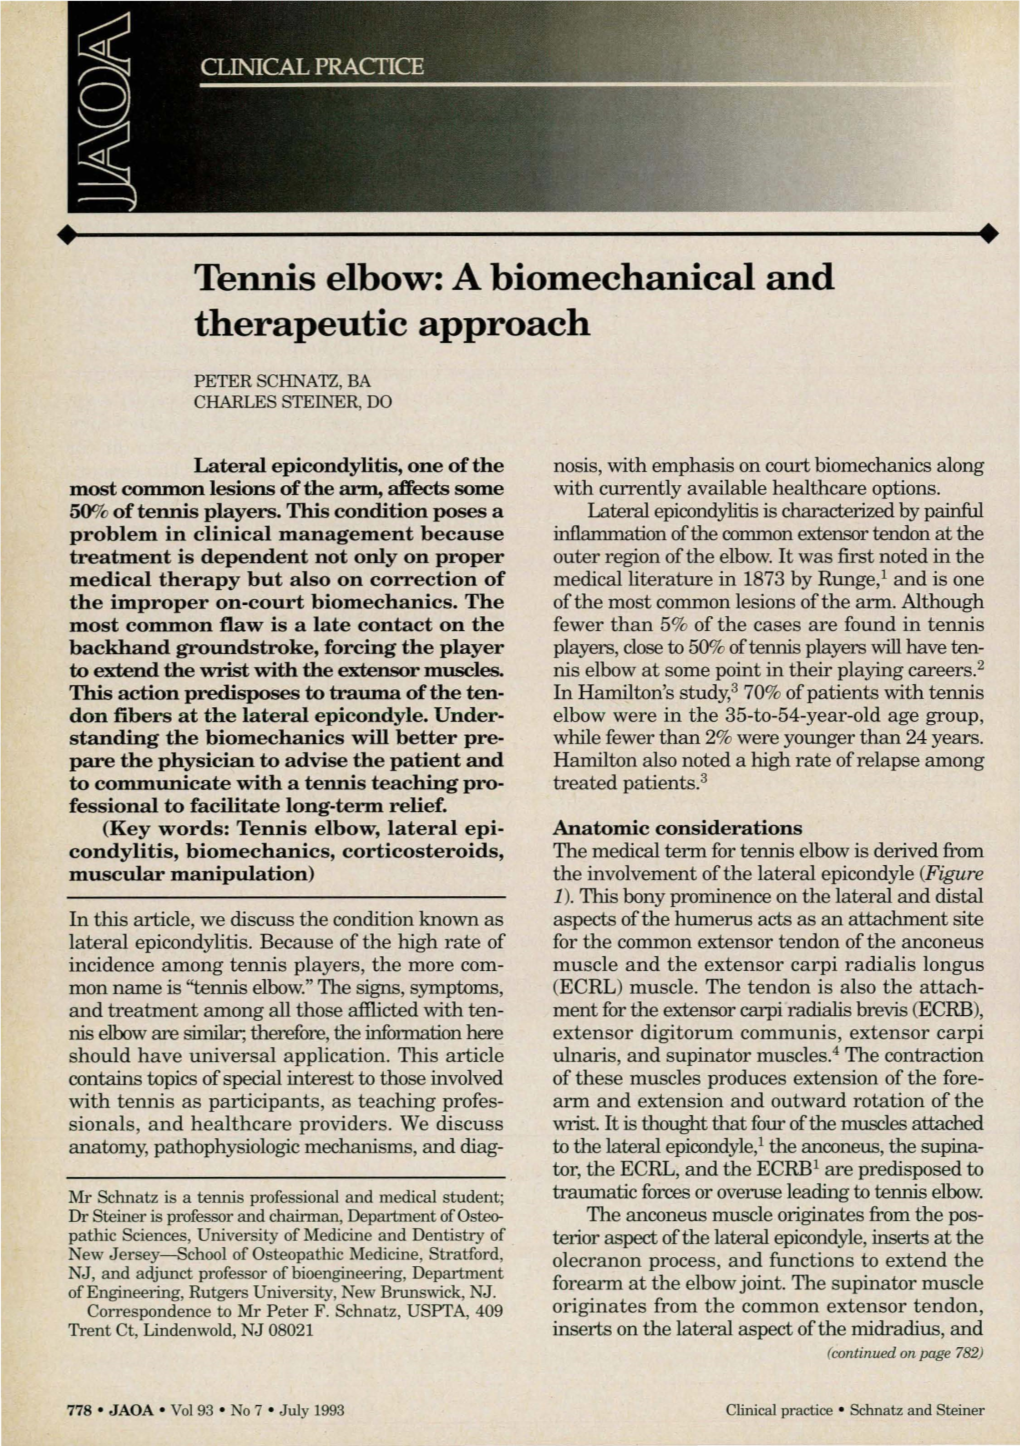 Tennis Elbow: a Biomechanical and Therapeutic Approach